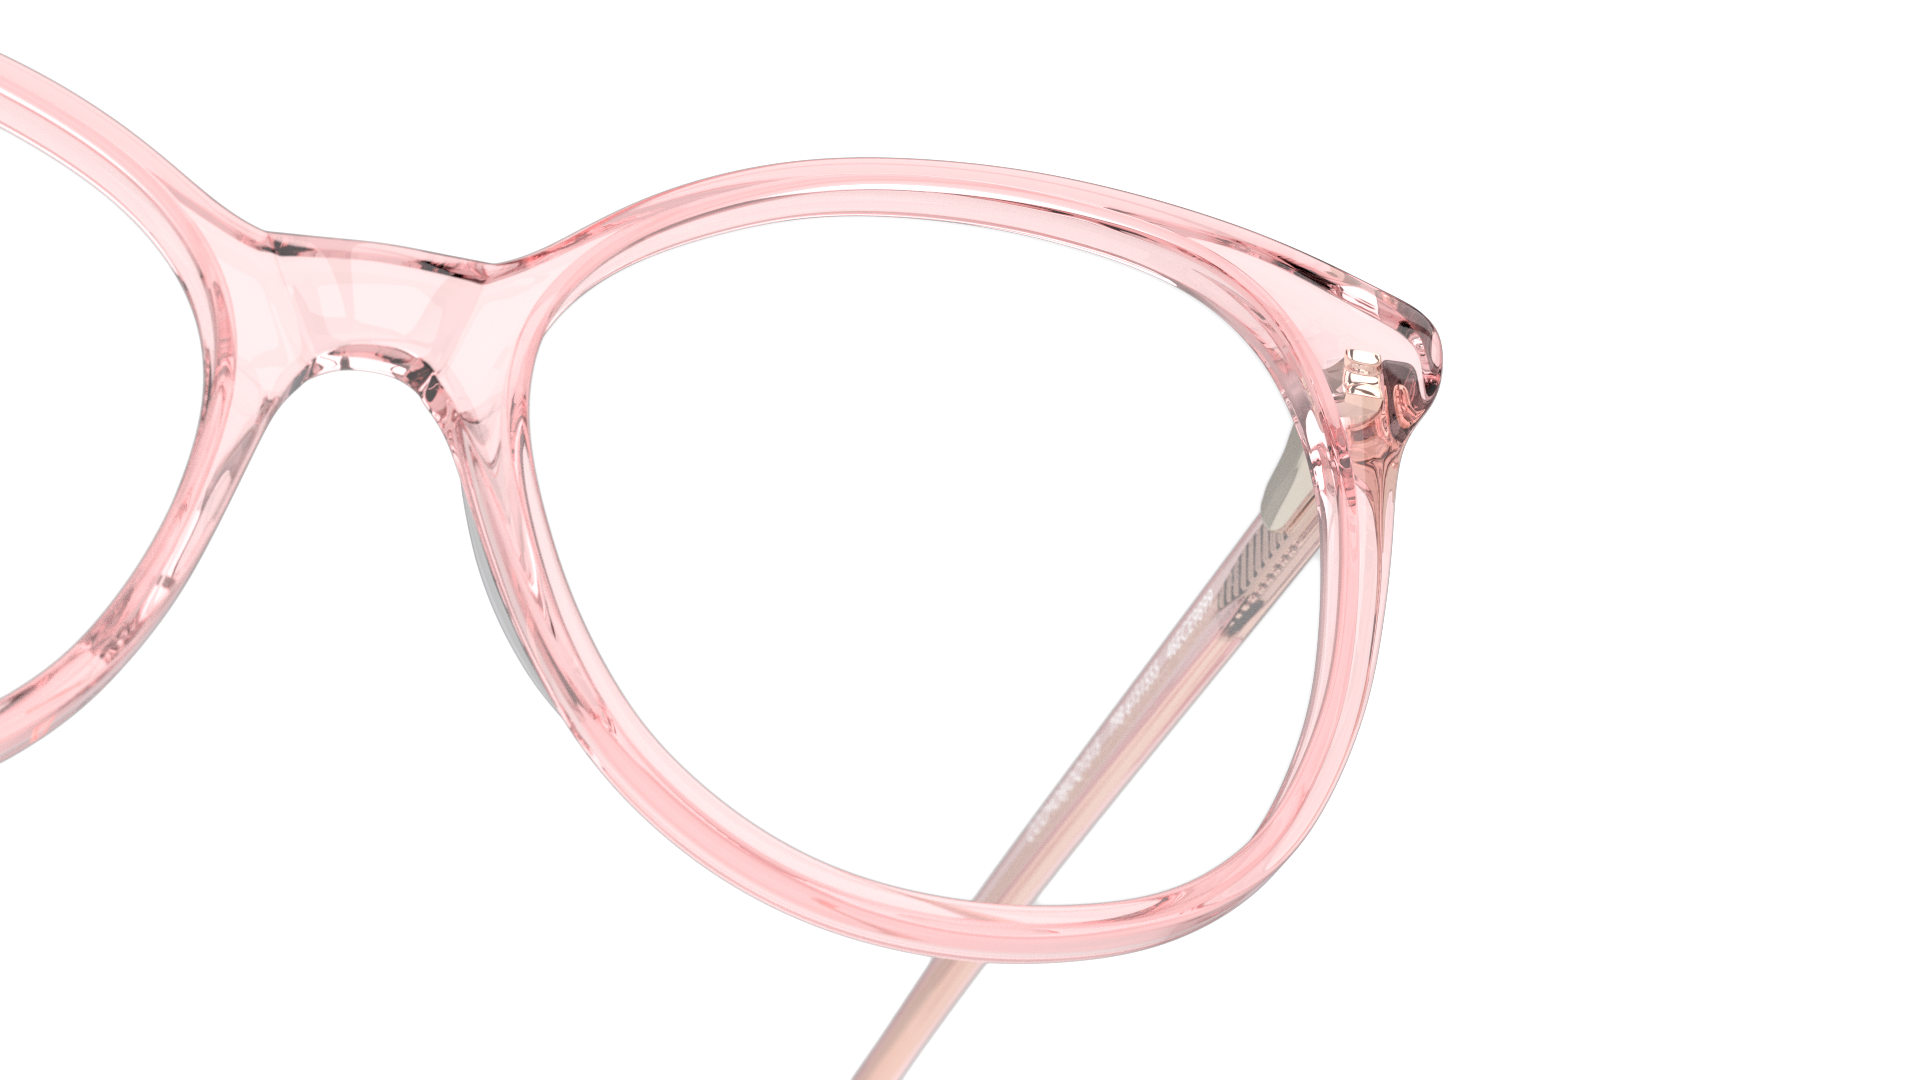 Detail01 Unofficial UNOF0002 Glasses Transparent / Pink